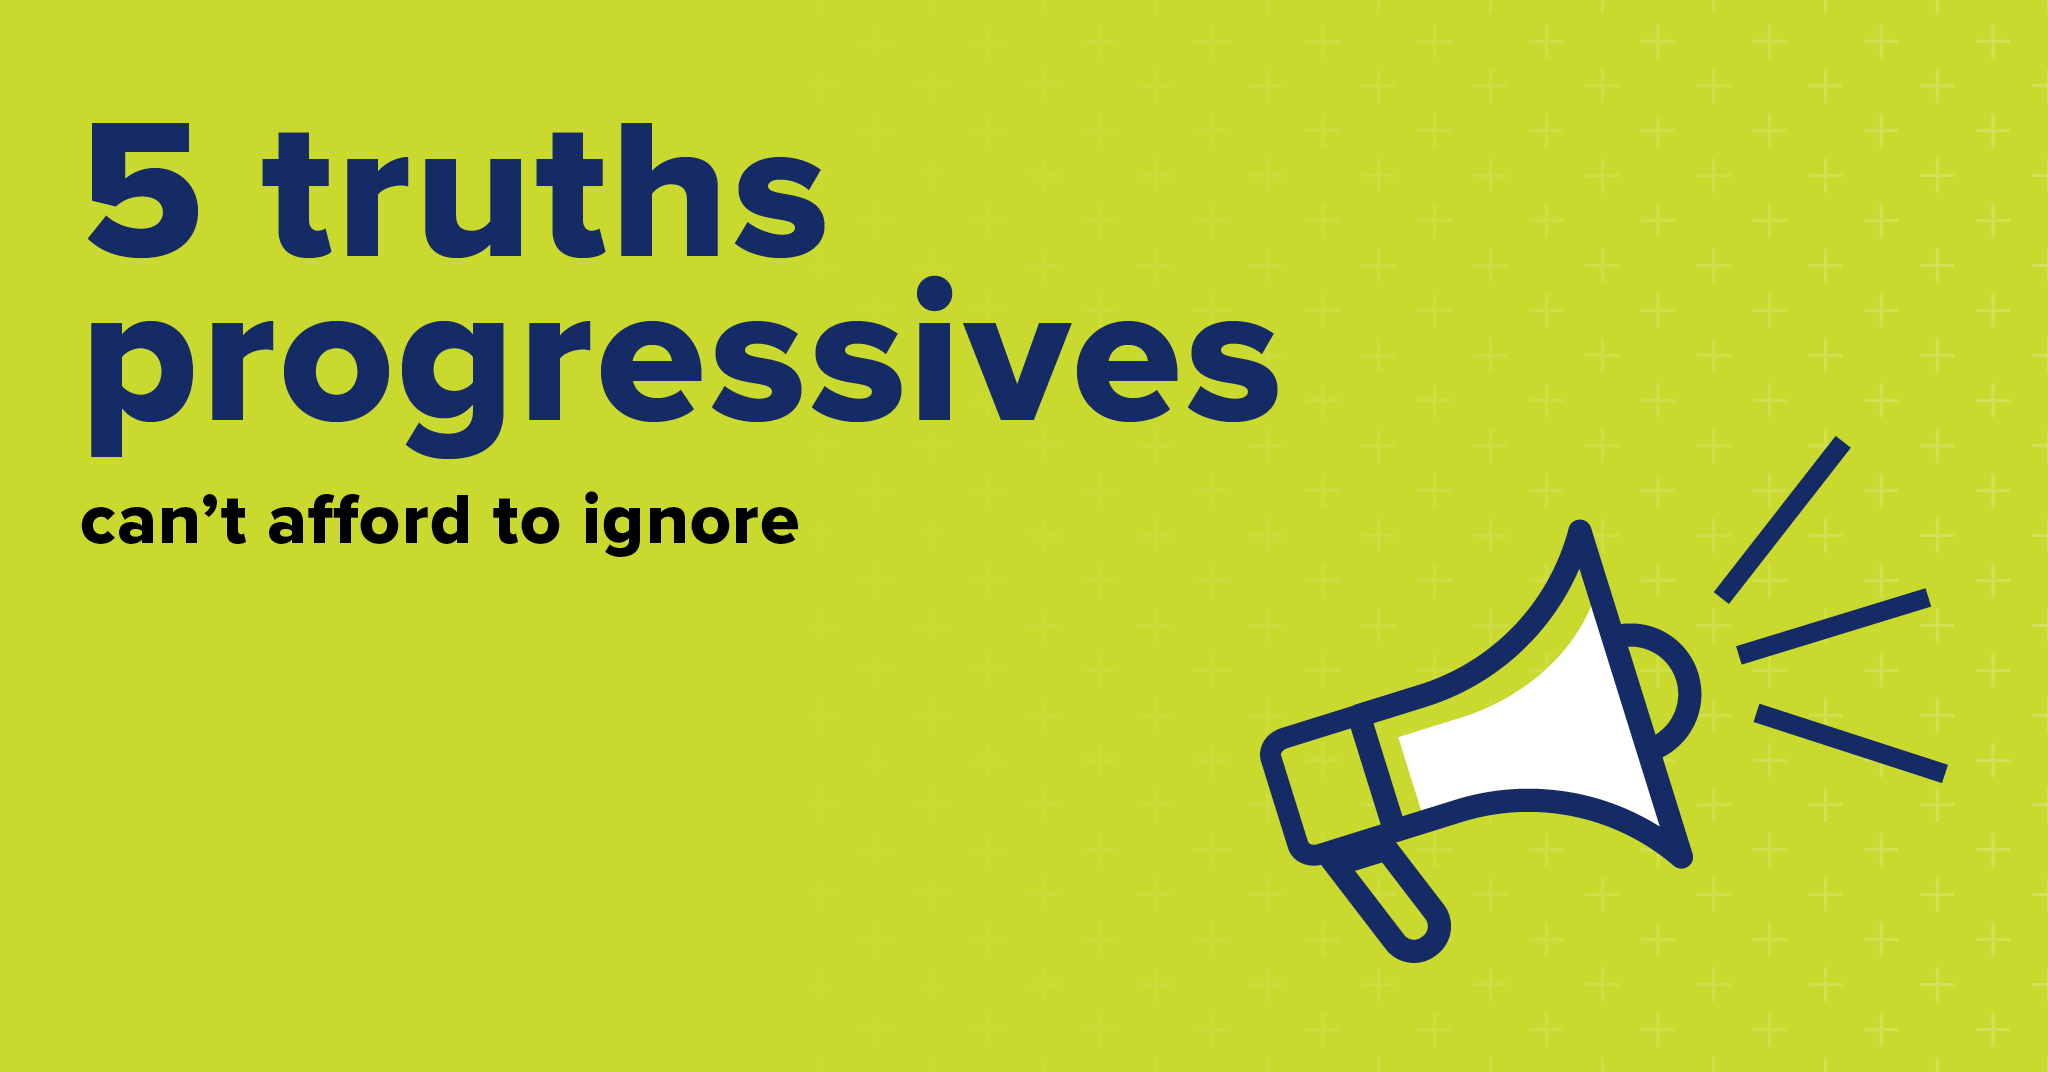 5 truths progressives can't afford to ignore